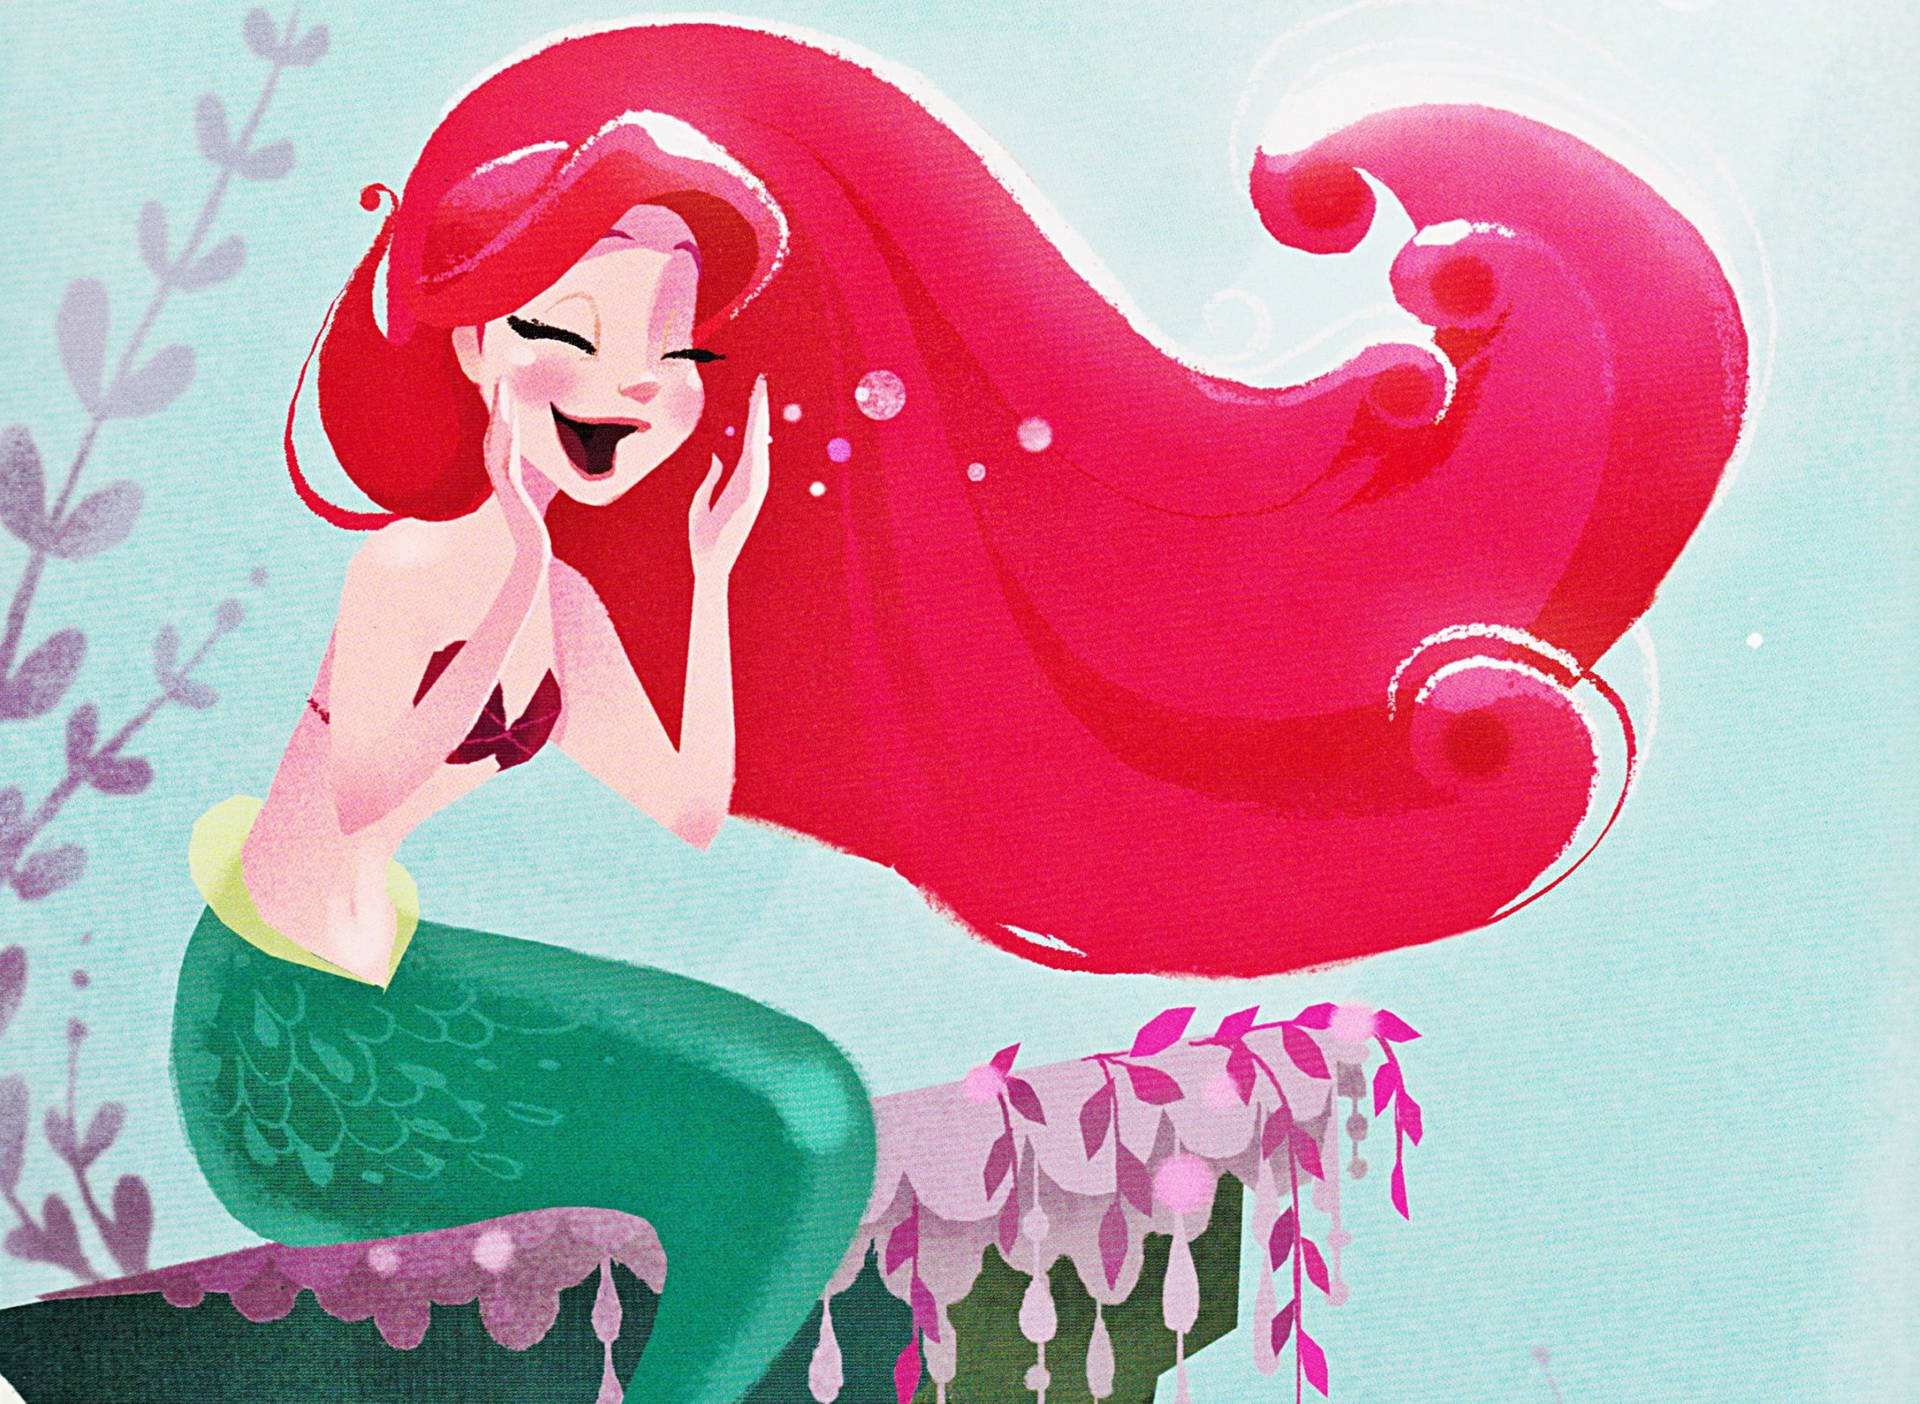 Ariel 2530X1850 Wallpaper and Background Image